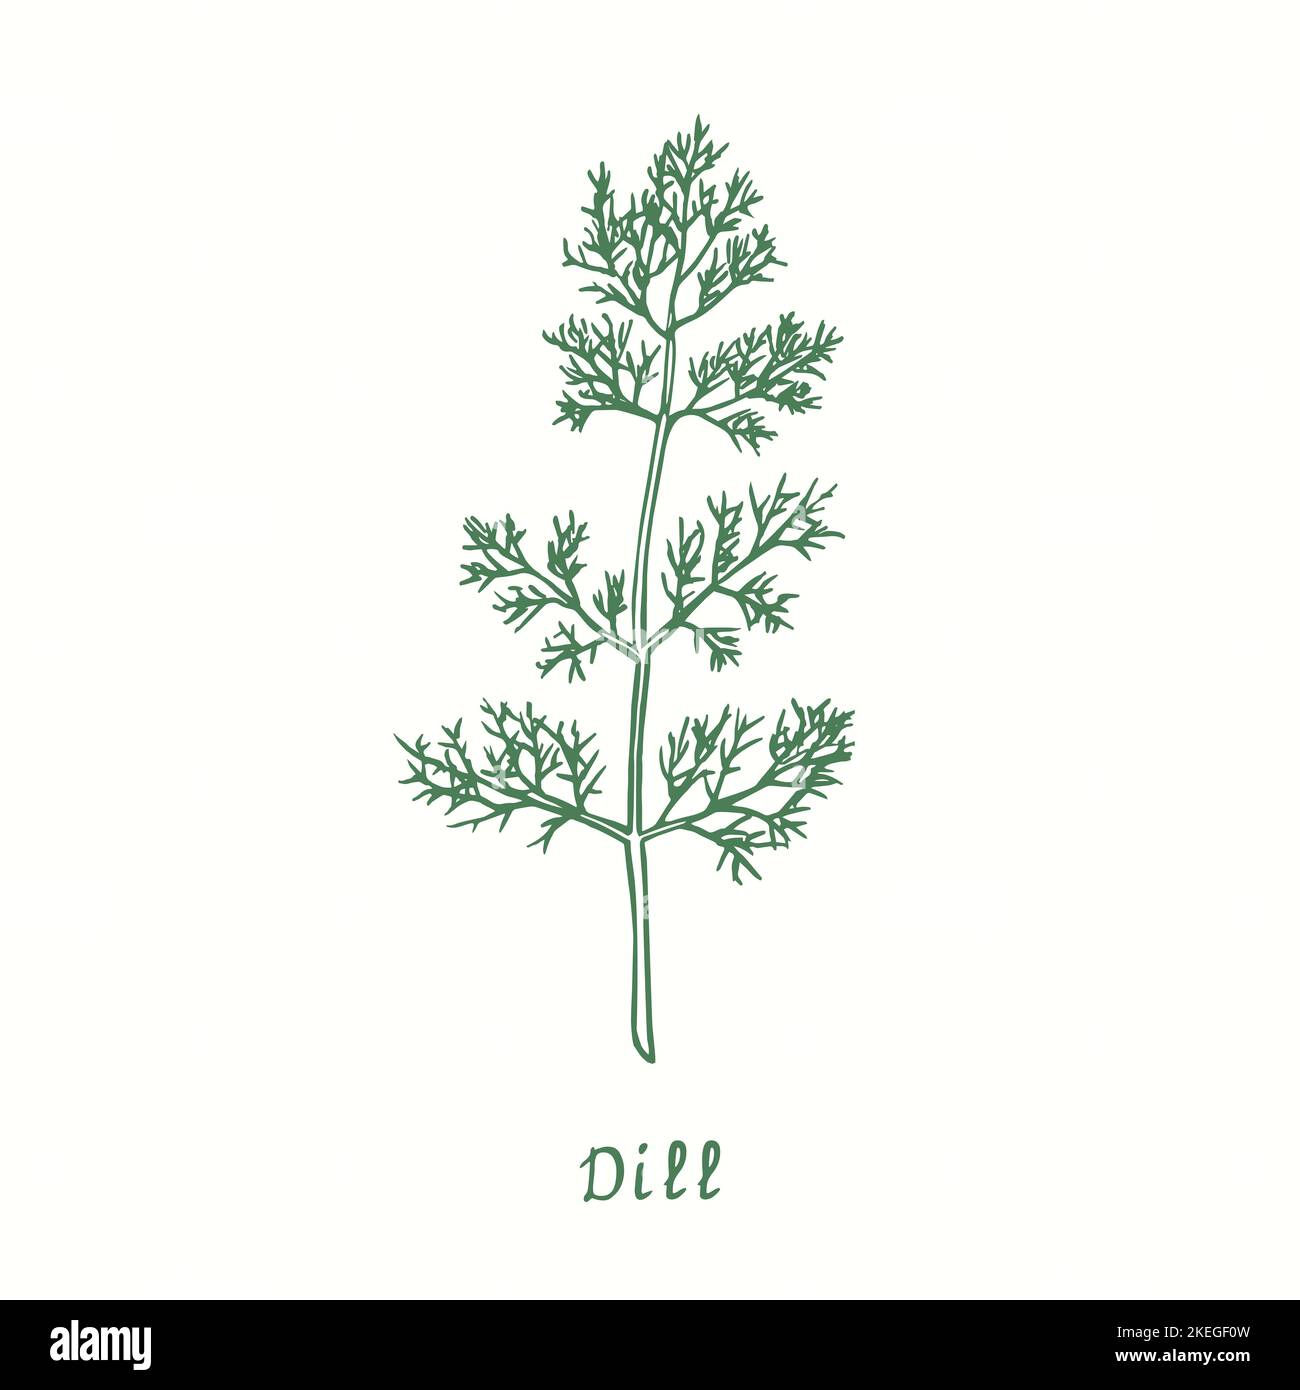 Dill green twig.  Ink black and white doodle drawing in woodcut style Stock Photo